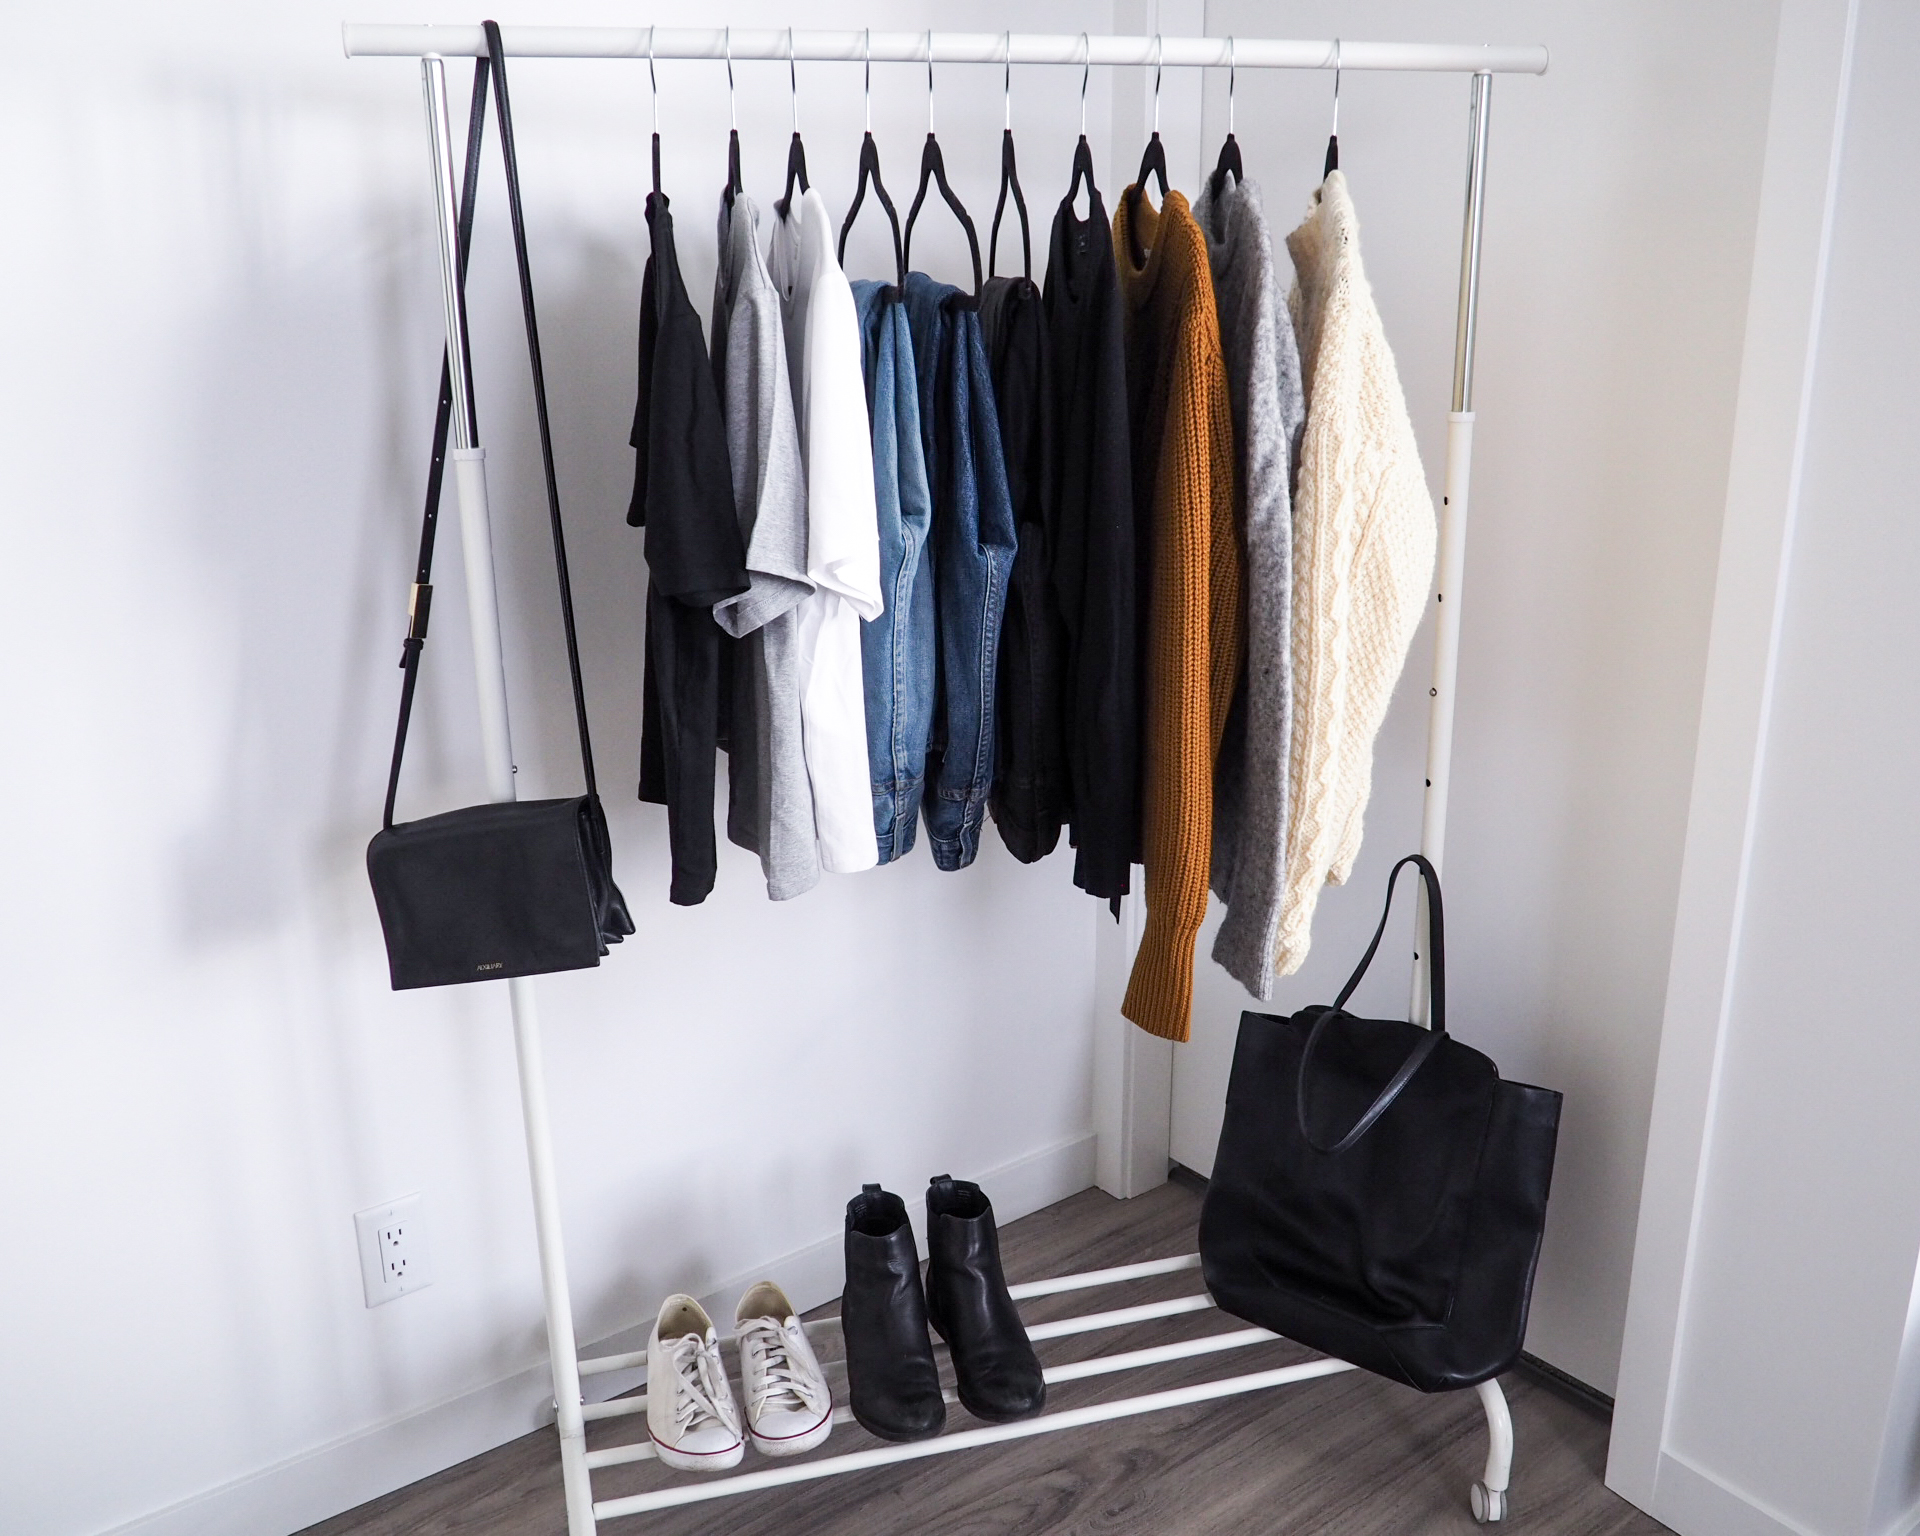 What I Learned from a Year of Capsule Wardrobes